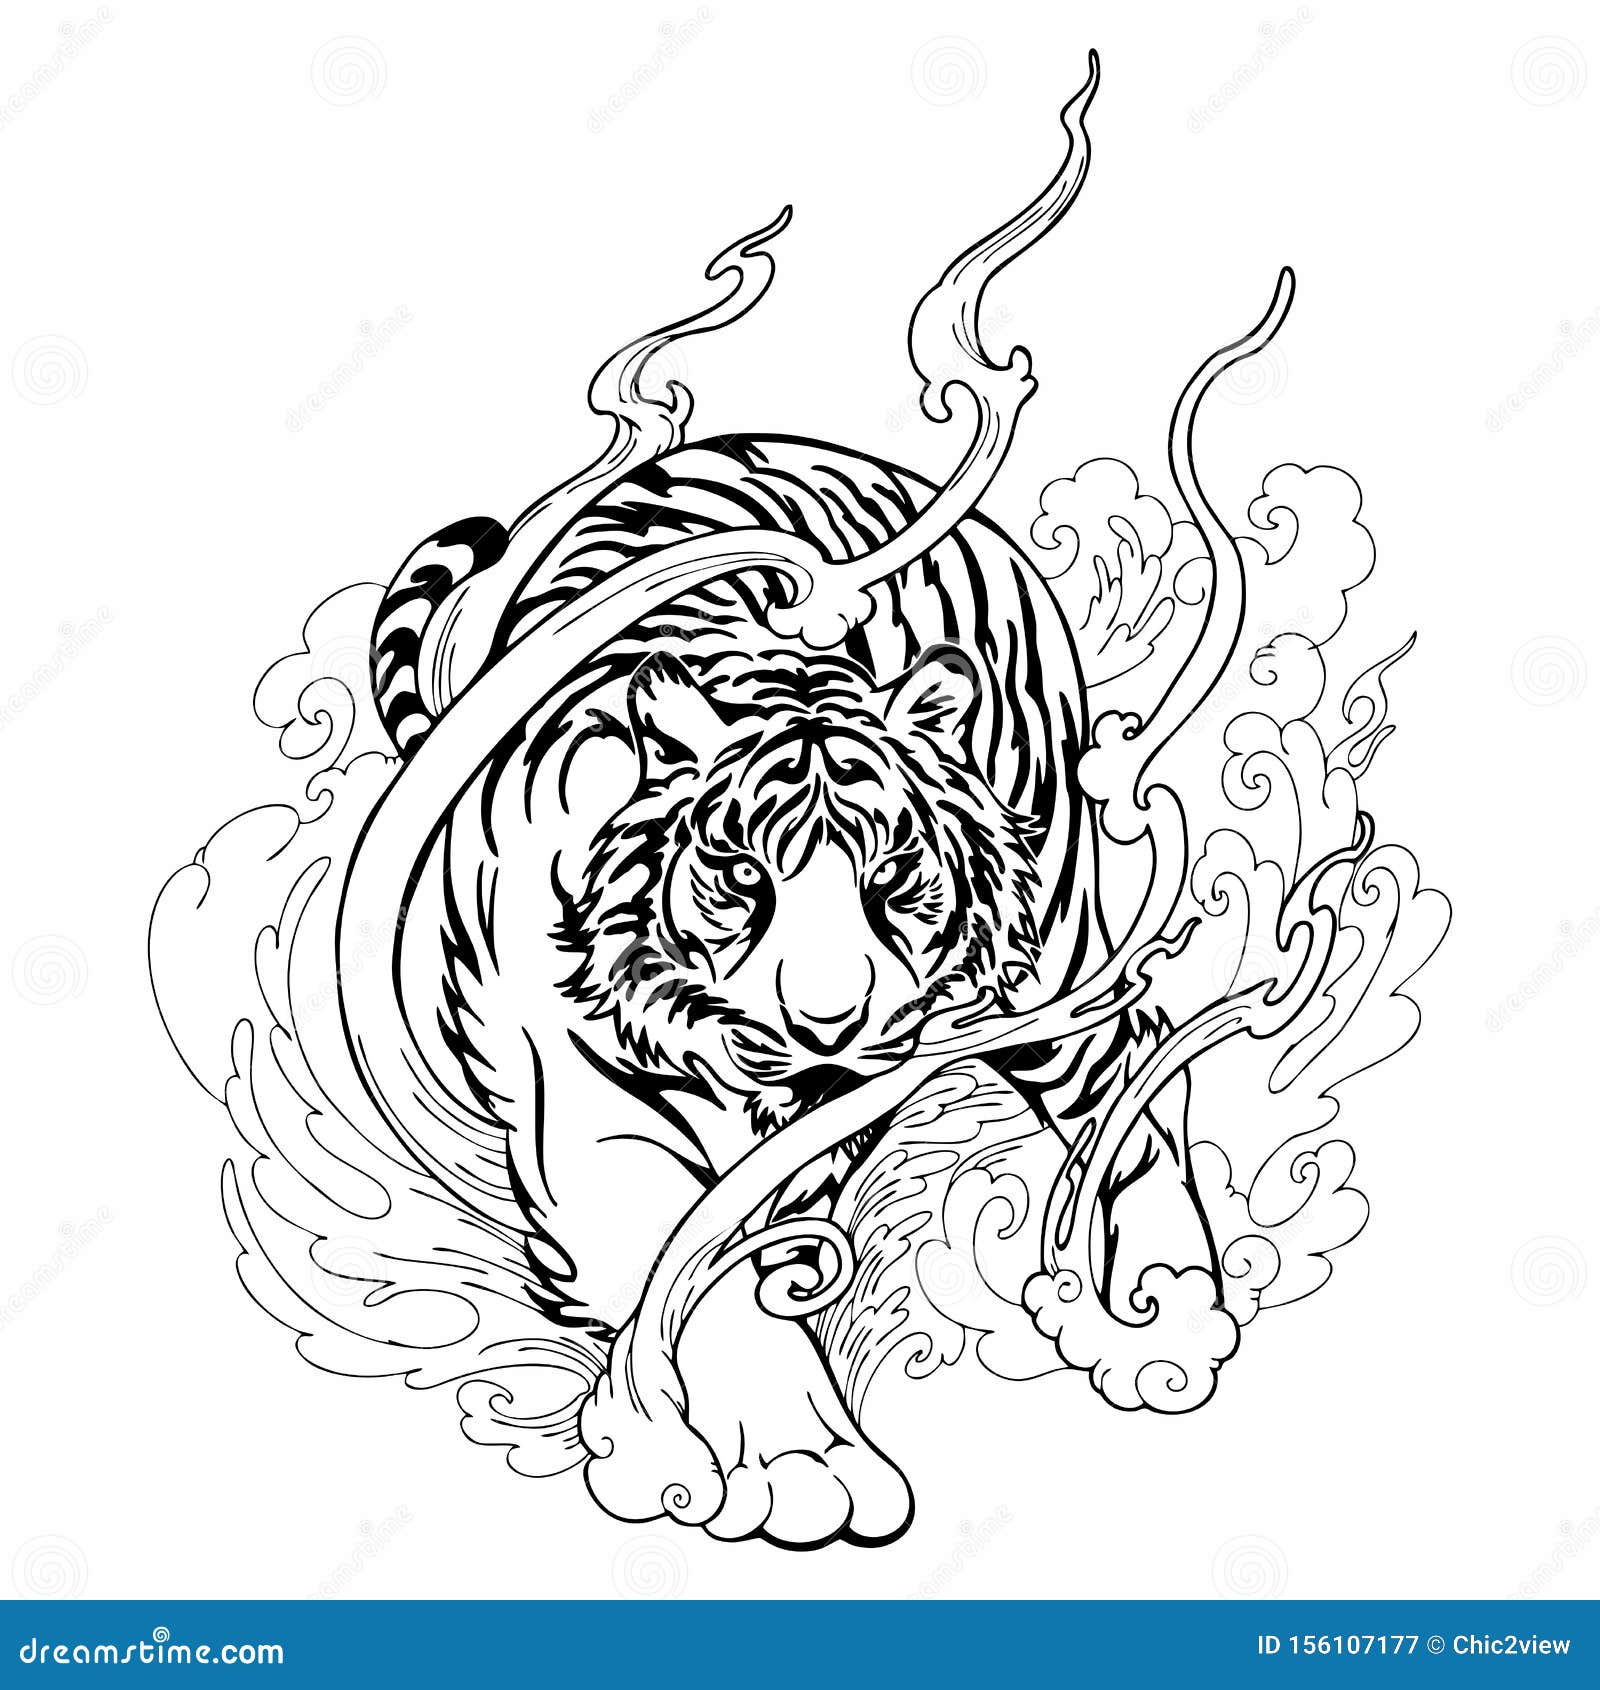 Pin by Joey M on Asia  Asian Arts  Tiger art Tiger painting Japanese  tattoo art